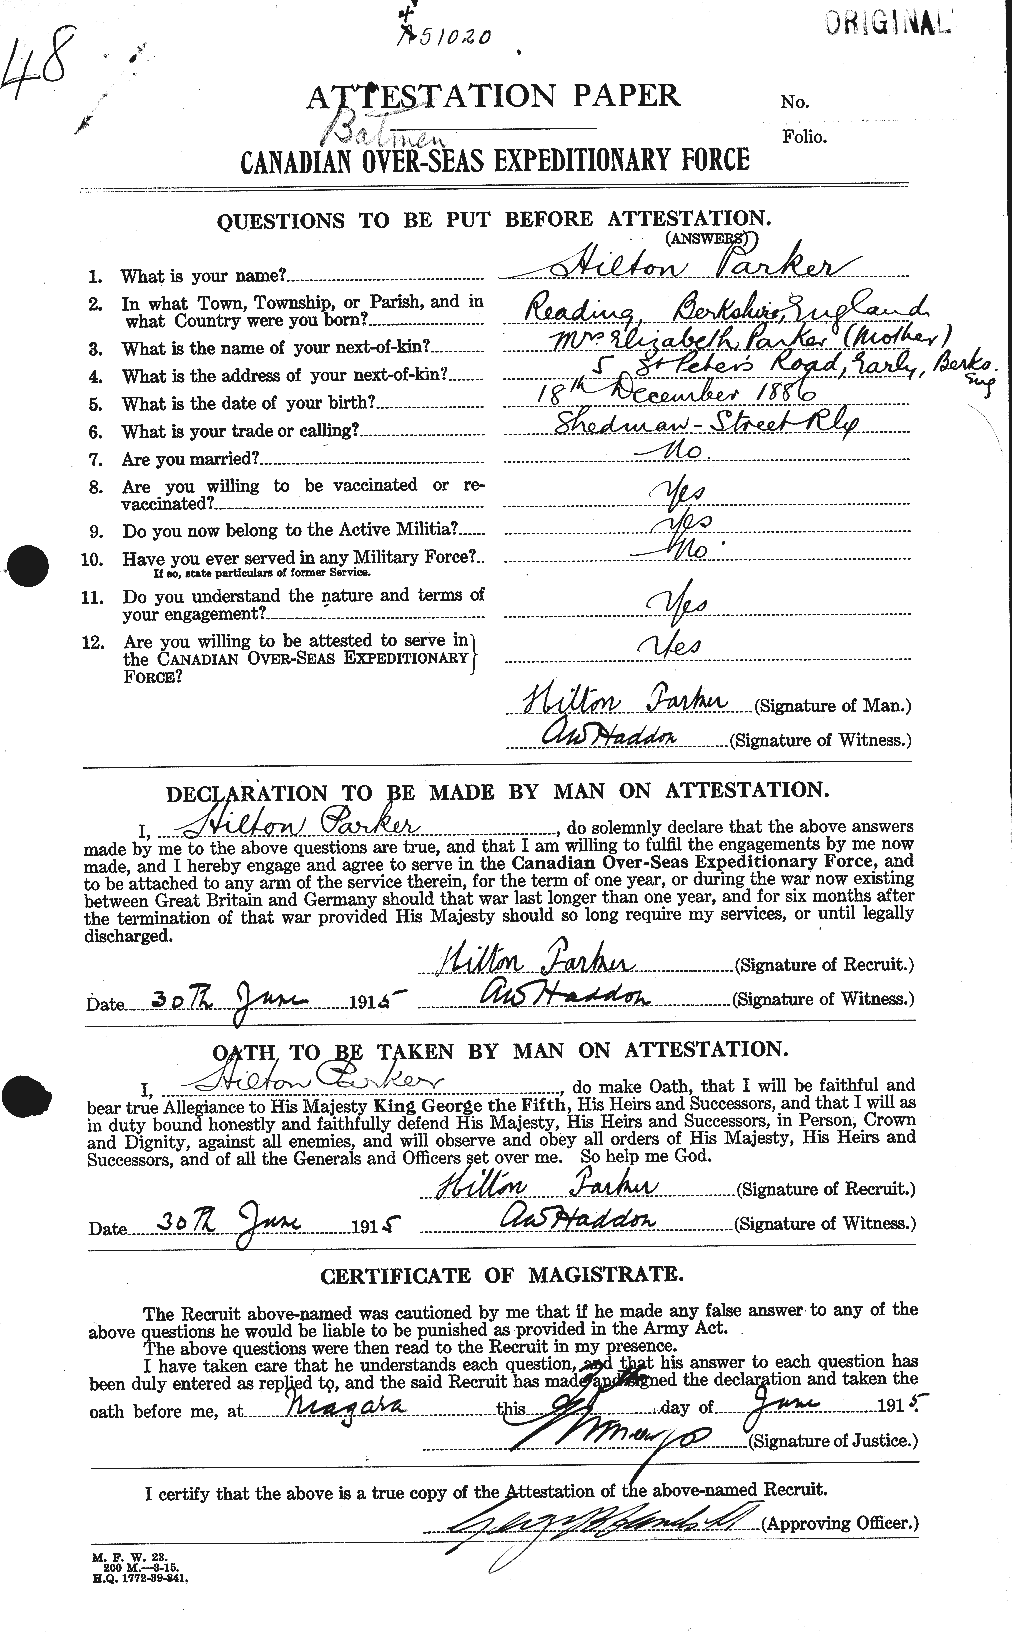 Personnel Records of the First World War - CEF 565378a